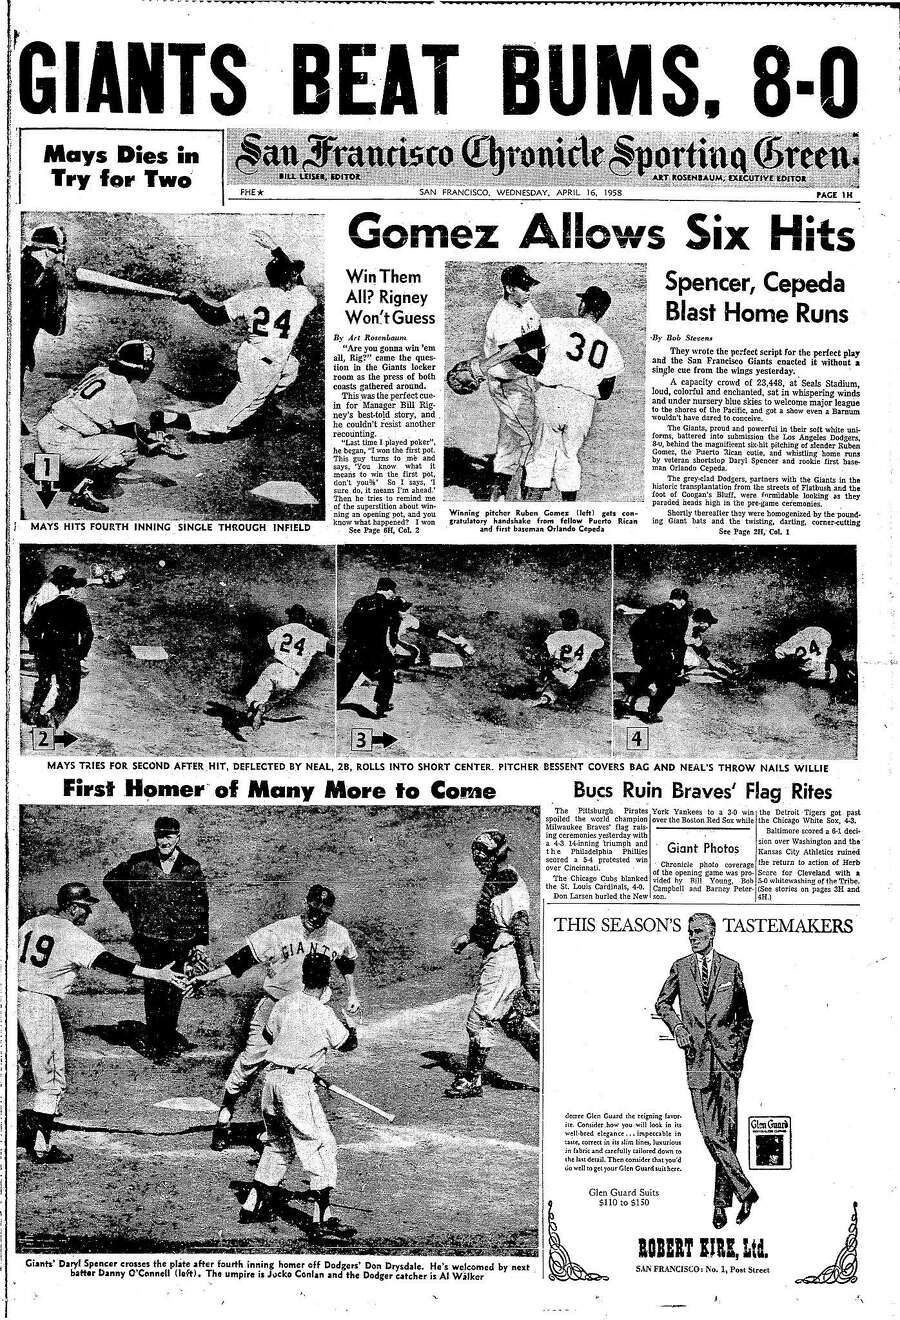 San Giants' home Opening Day highlights from The Chronicle's archive.